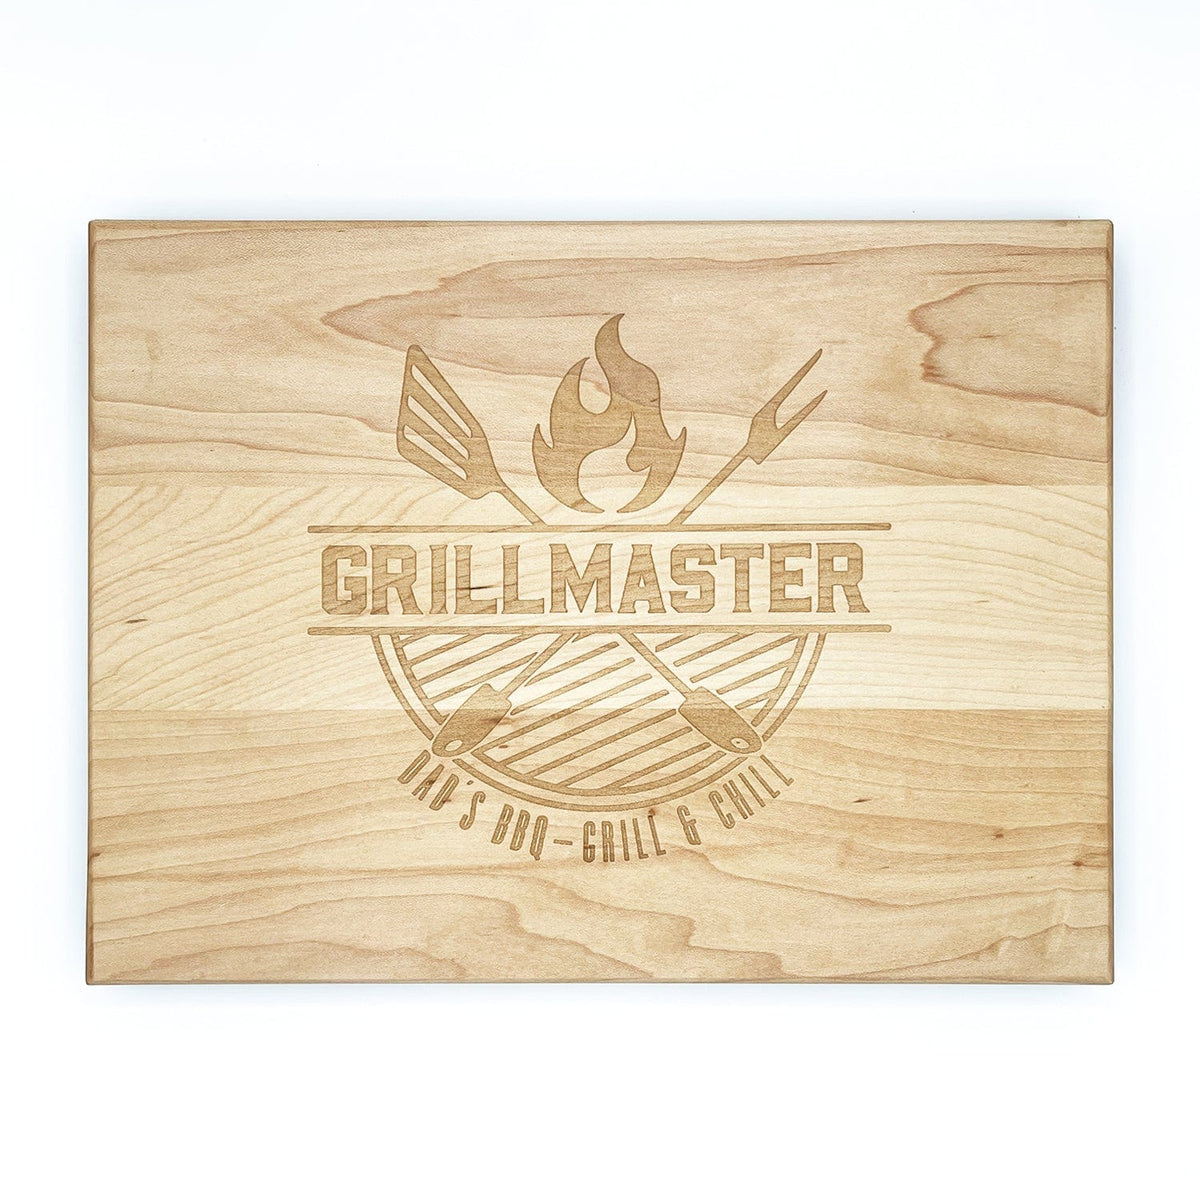 Personalized wood cutting board gift for dad - laser engraved gift with your personalization